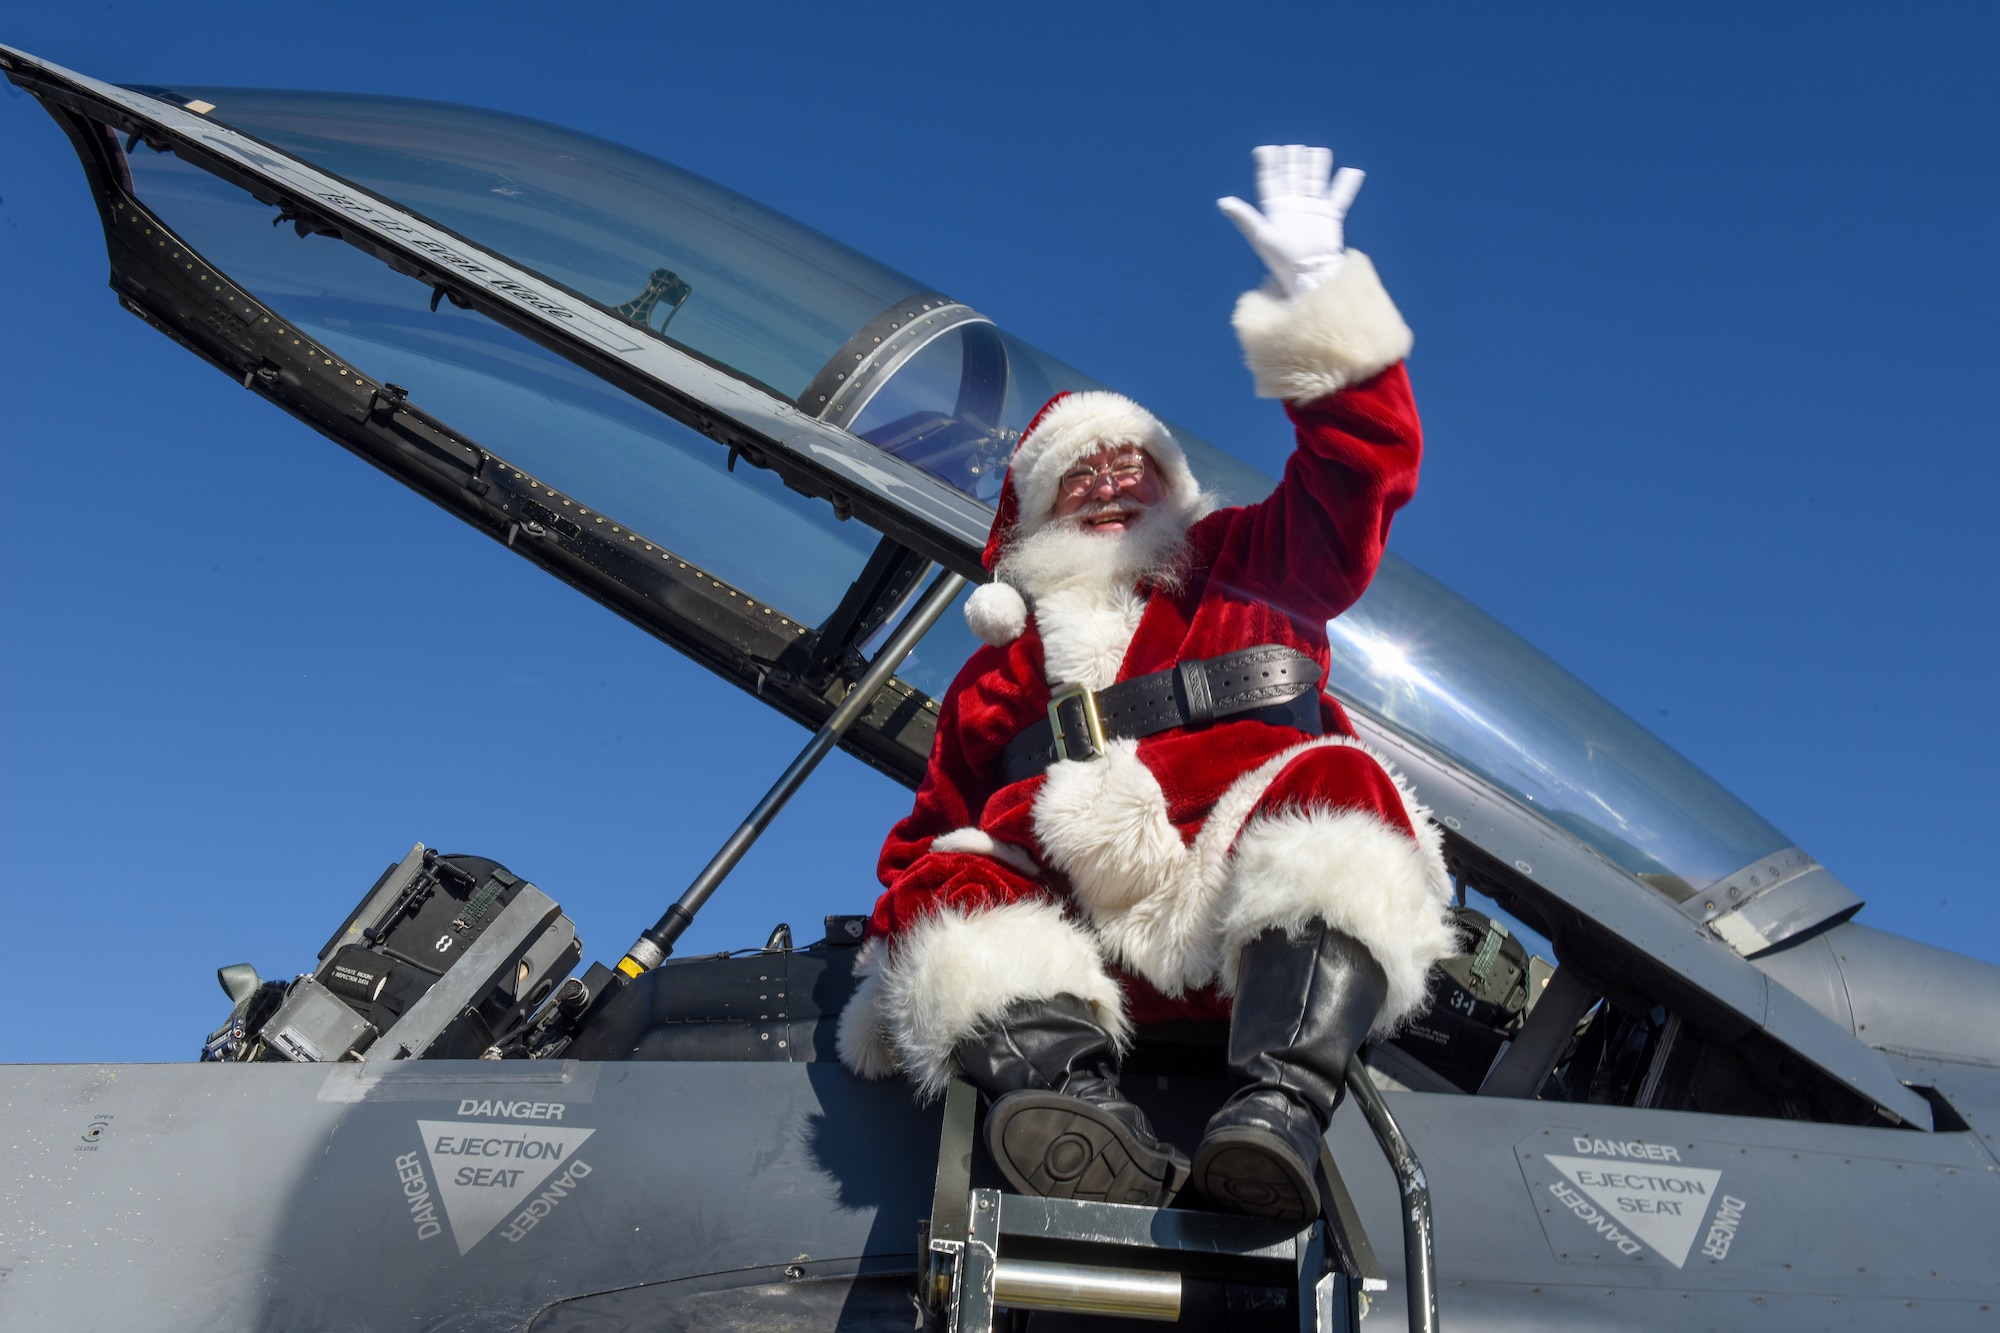 Santa Claus waves as he arrives in an F-16 Fighting Falcon